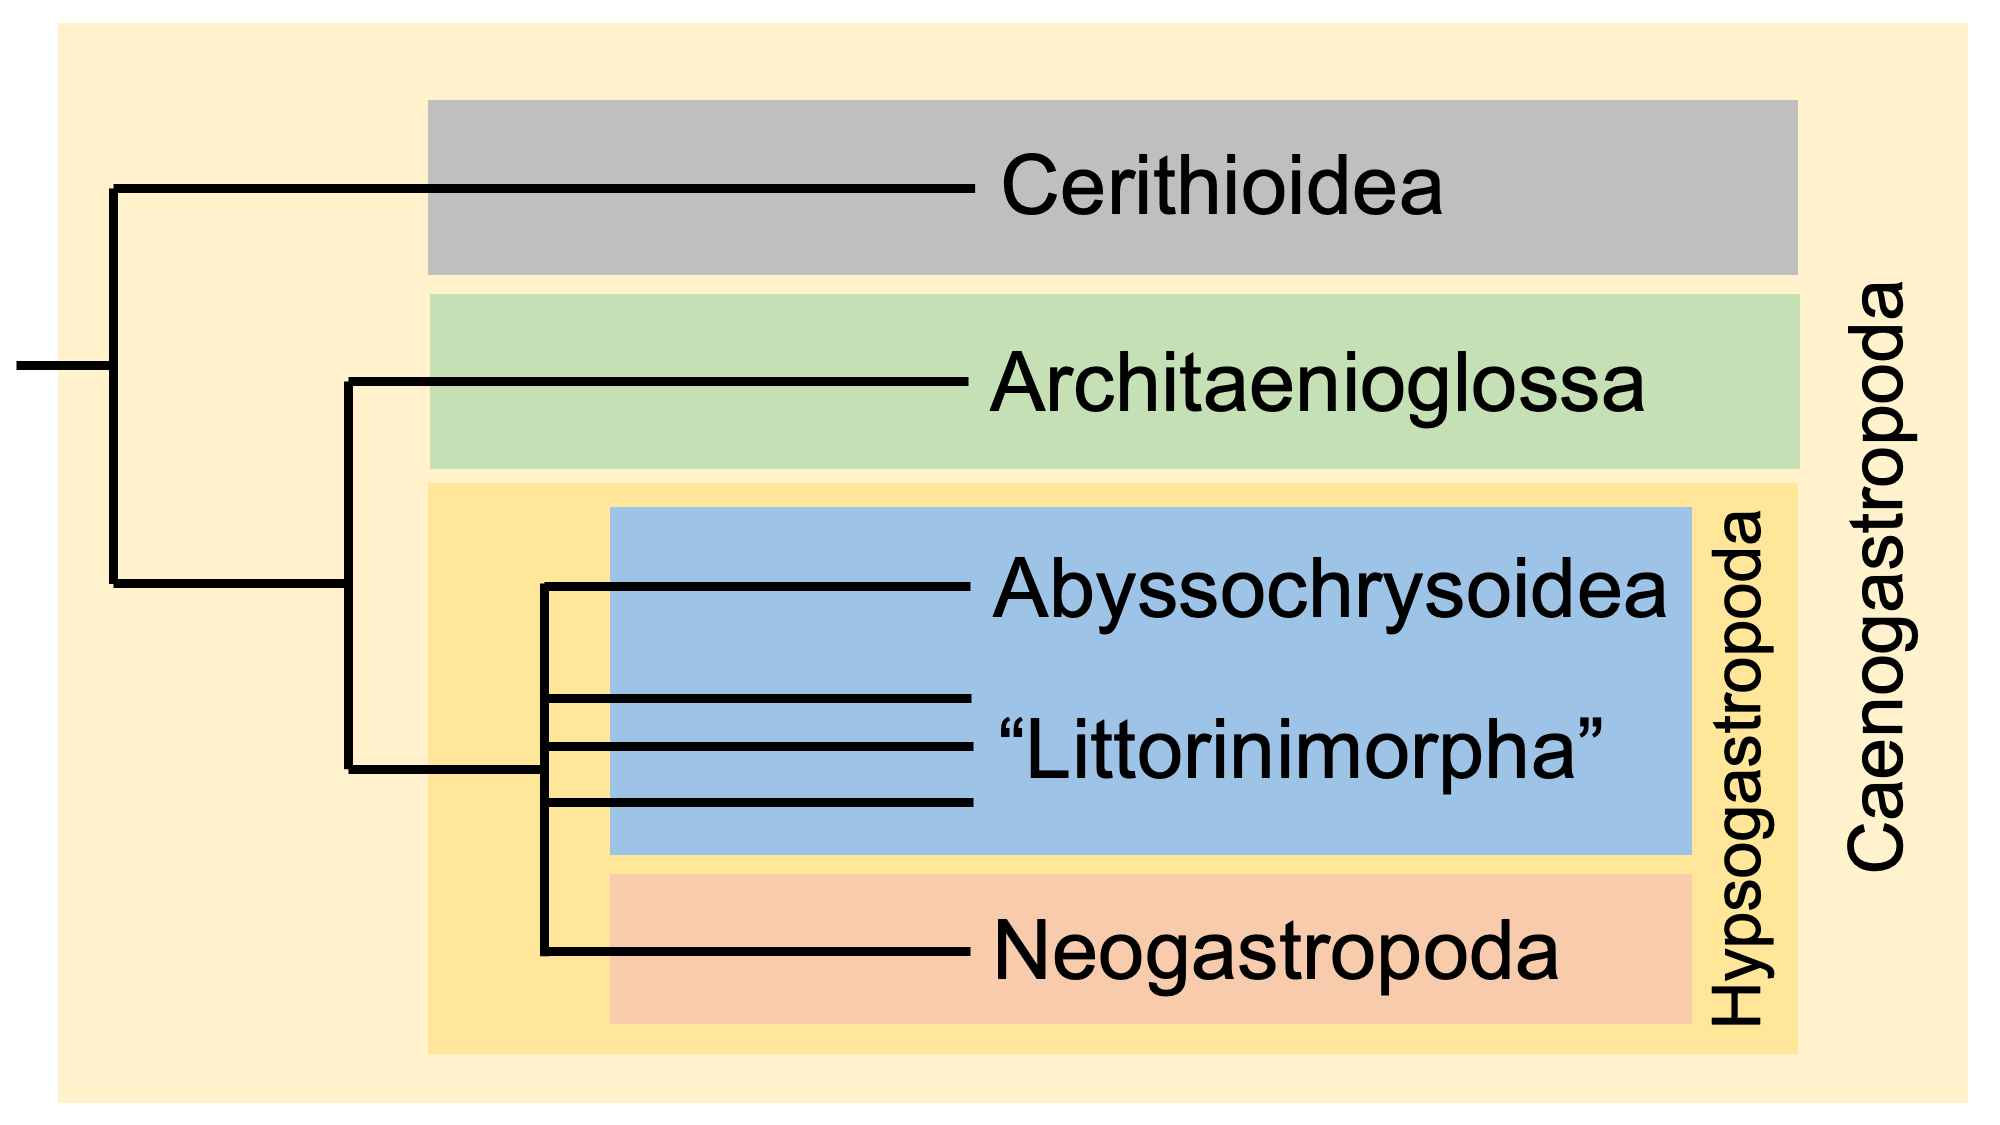 Diagram showing a phylogenetic hypothesis for the caenogastropod clade.